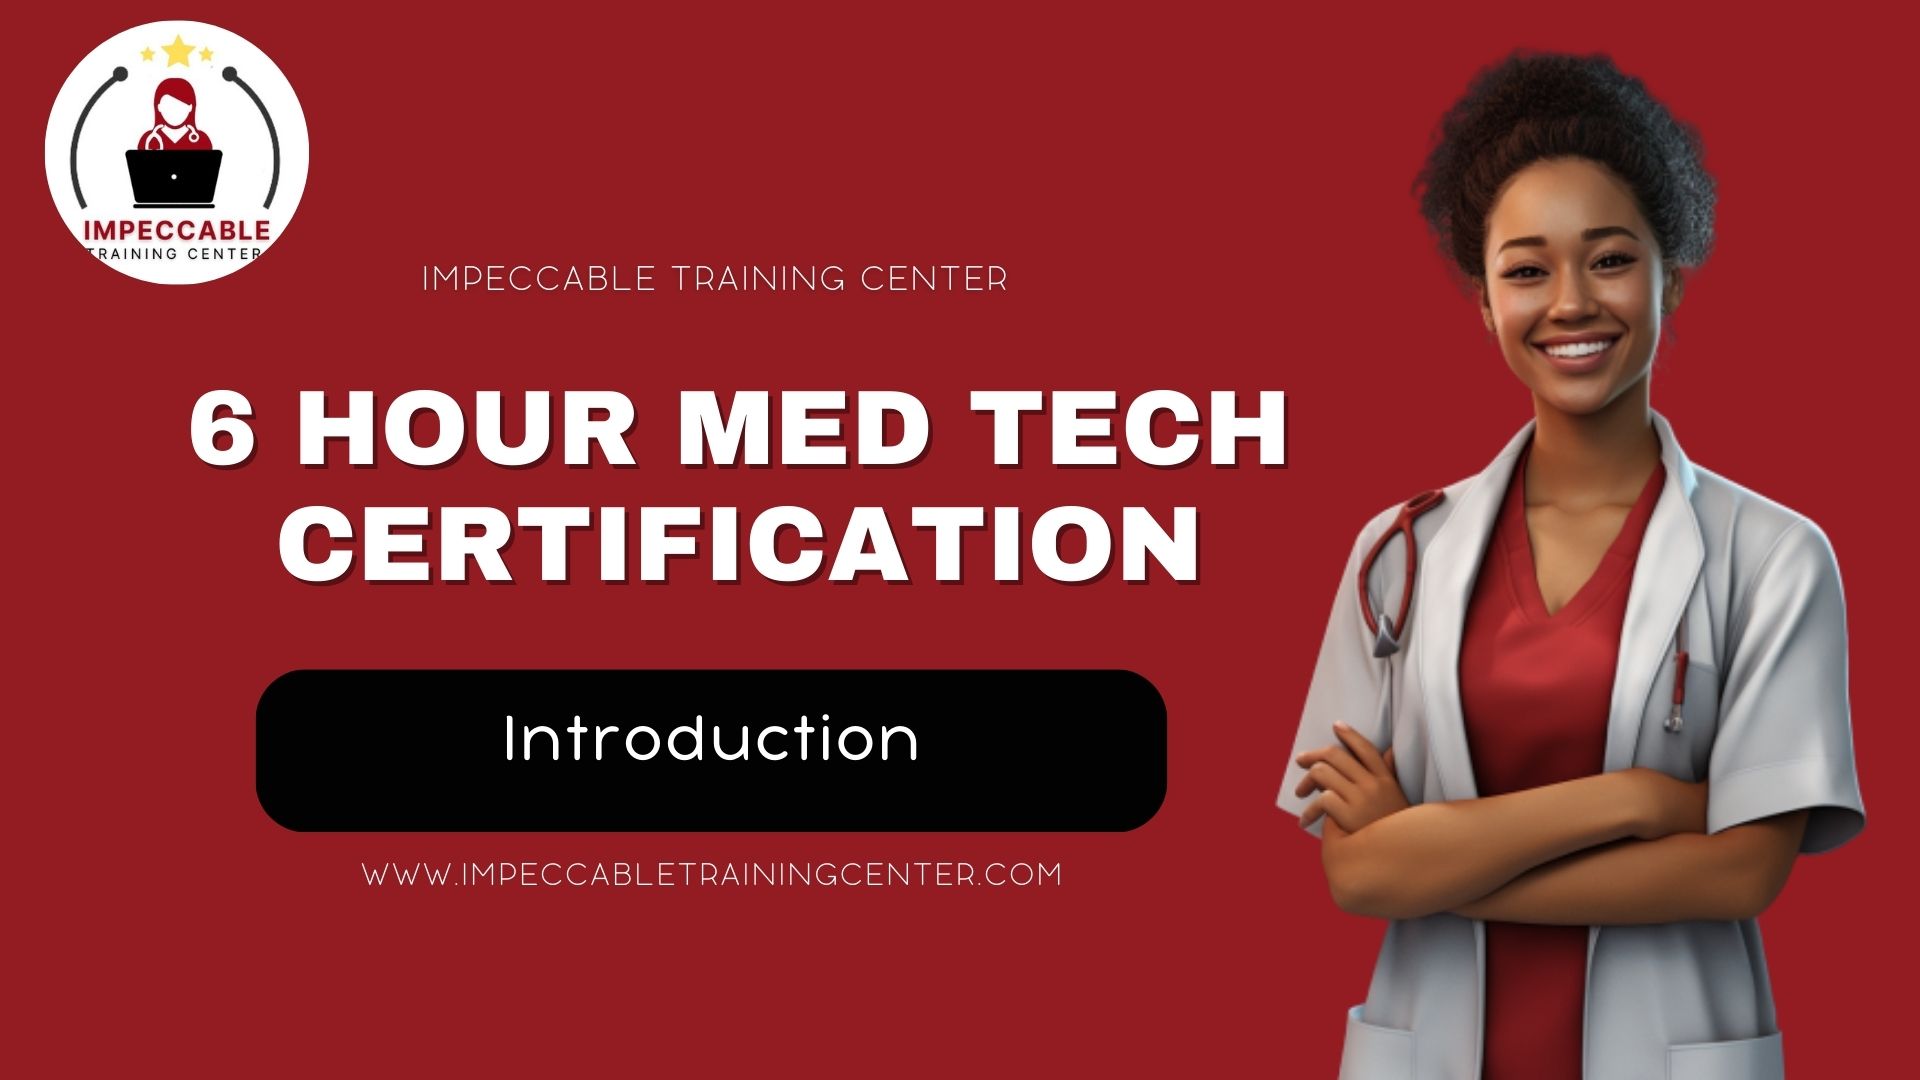 6 Hour Med Tech Certification Impeccable Training Center